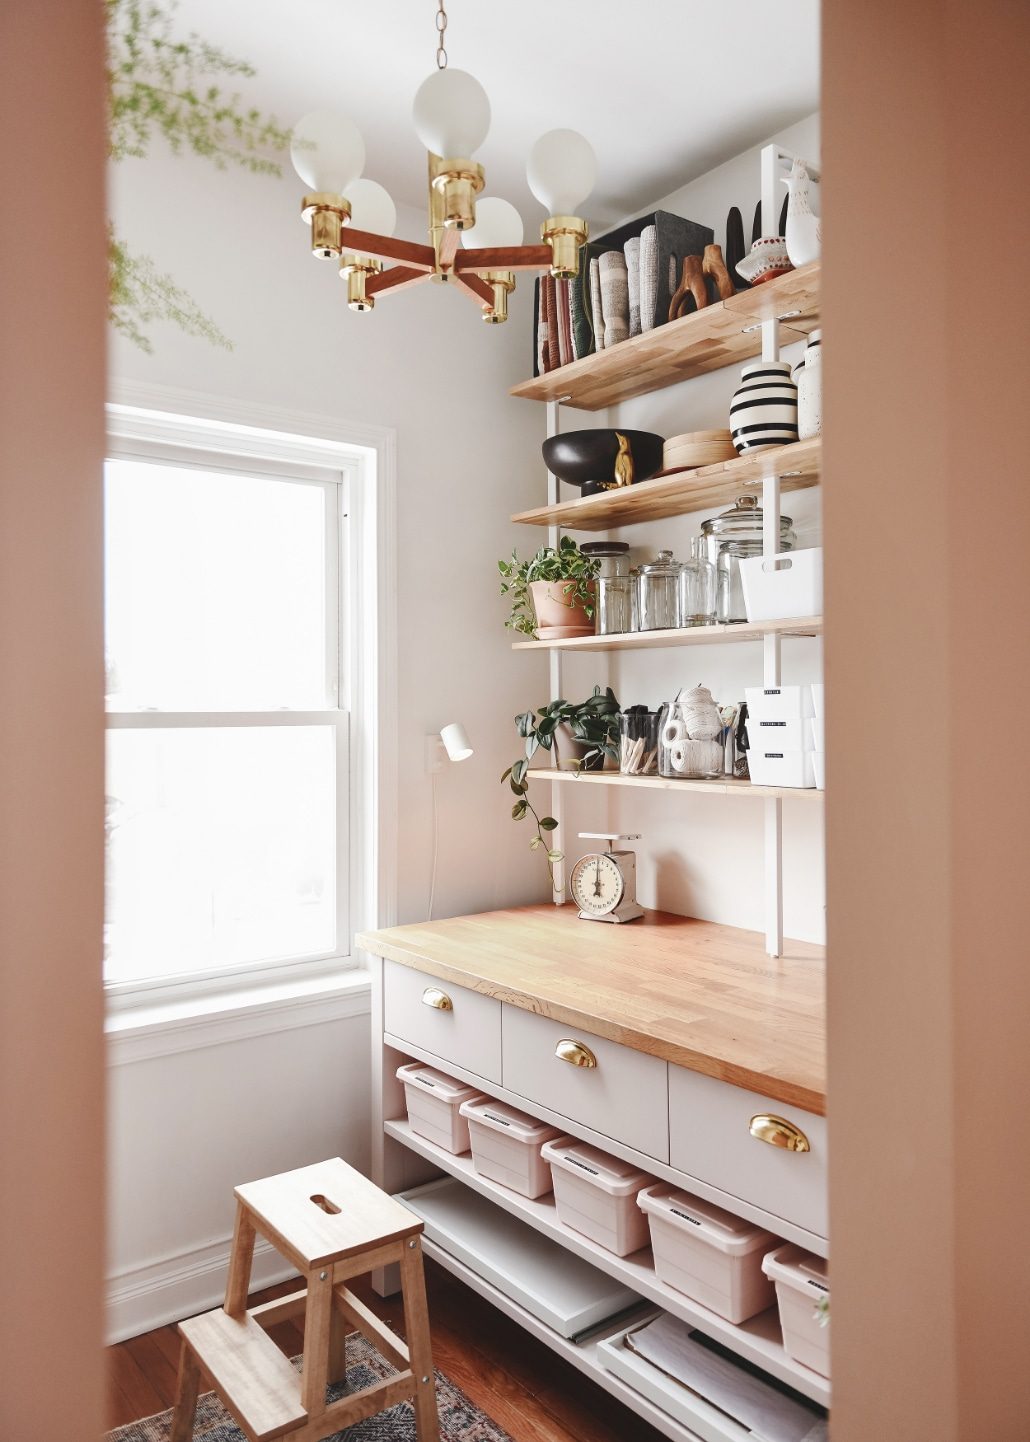 The EQ3 ladder shelf system in our craft room // via Yellow Brick Home